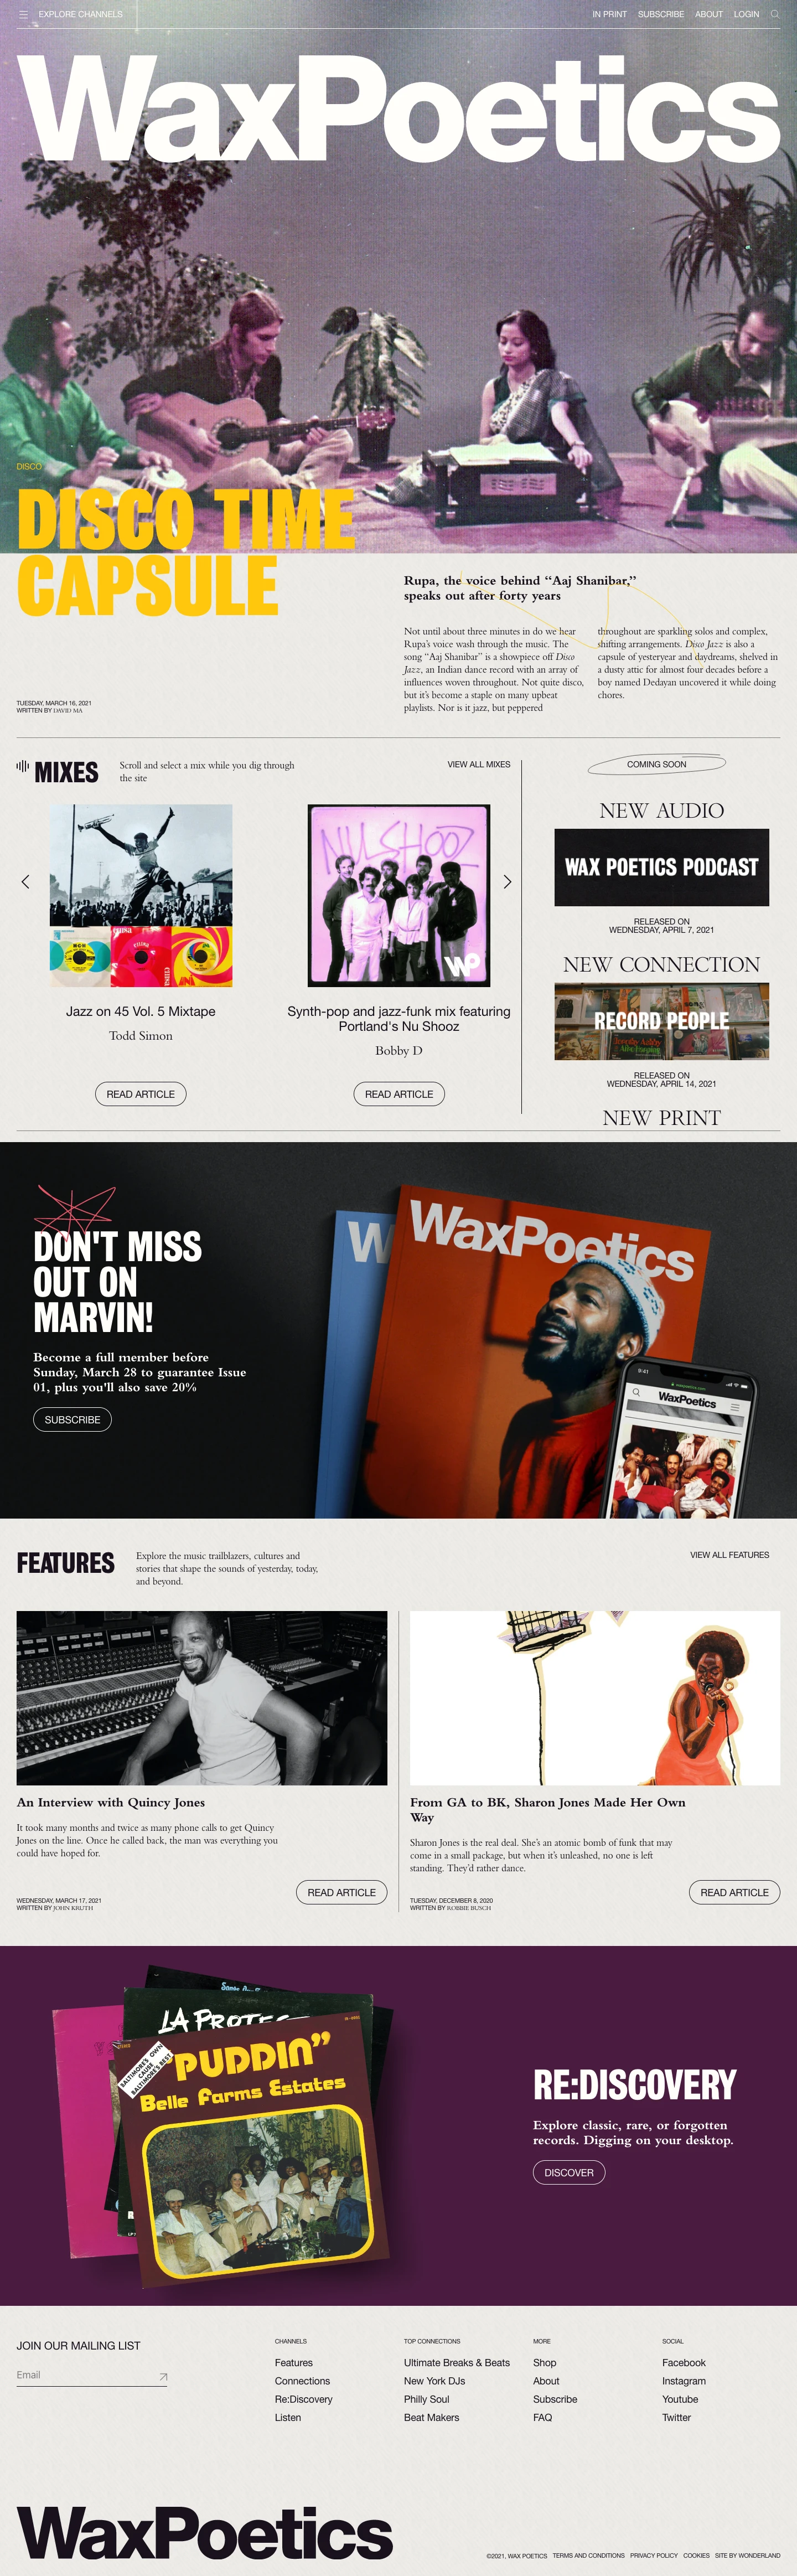 Wax Poetics Landing Page Example: We explore the music trailblazers, cultures and stories that shape the sounds of yesterday, today, and beyond. Sign-up to read, listen, watch, discover and discuss music with like-minded music people from around the world. 